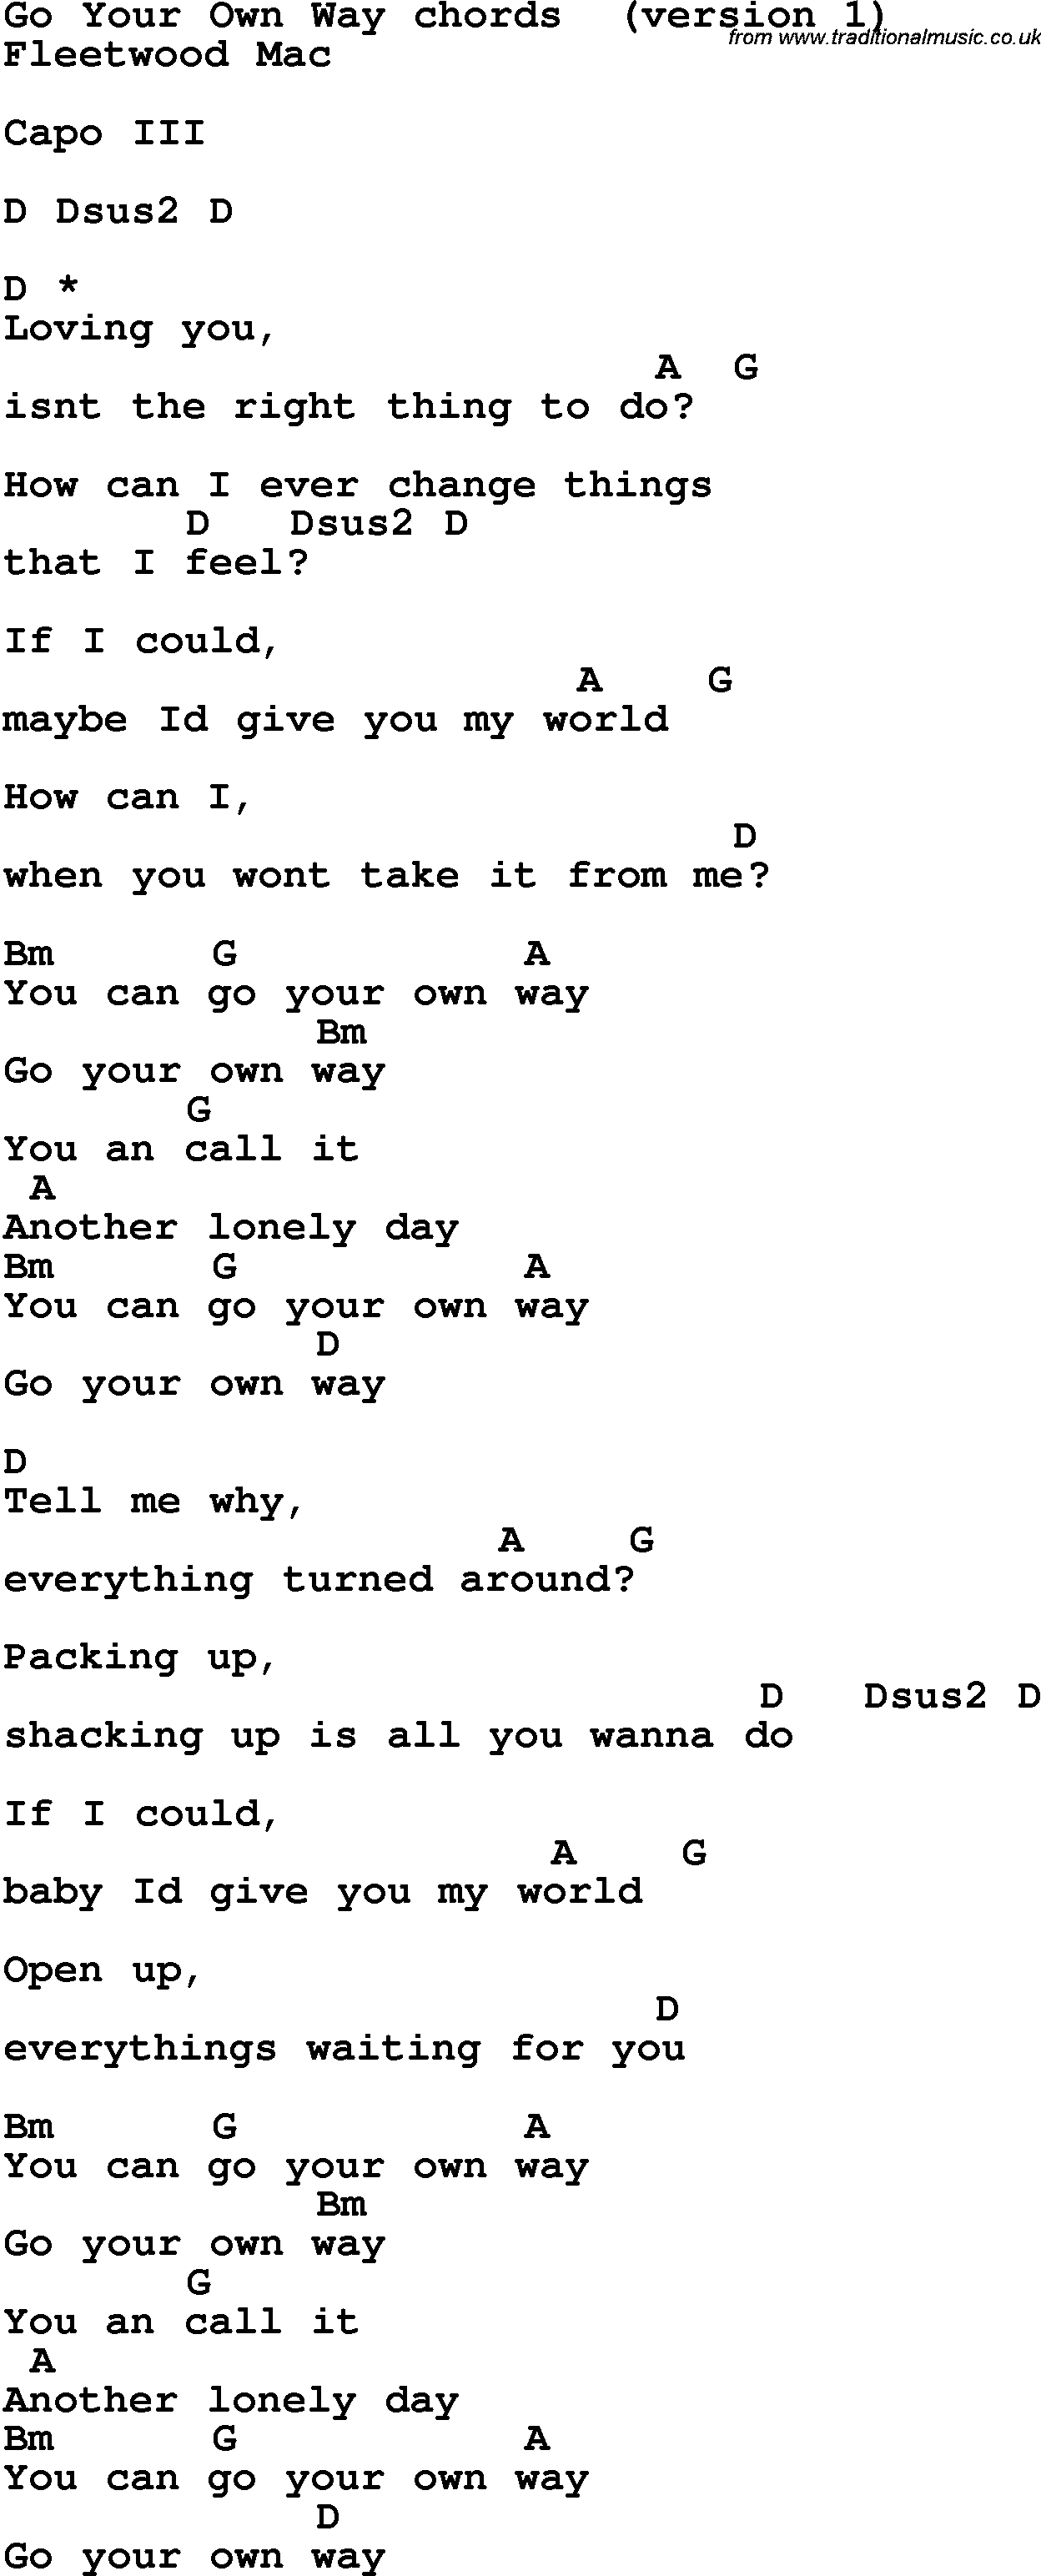 Song Lyrics with guitar chords for Go Your Own Way